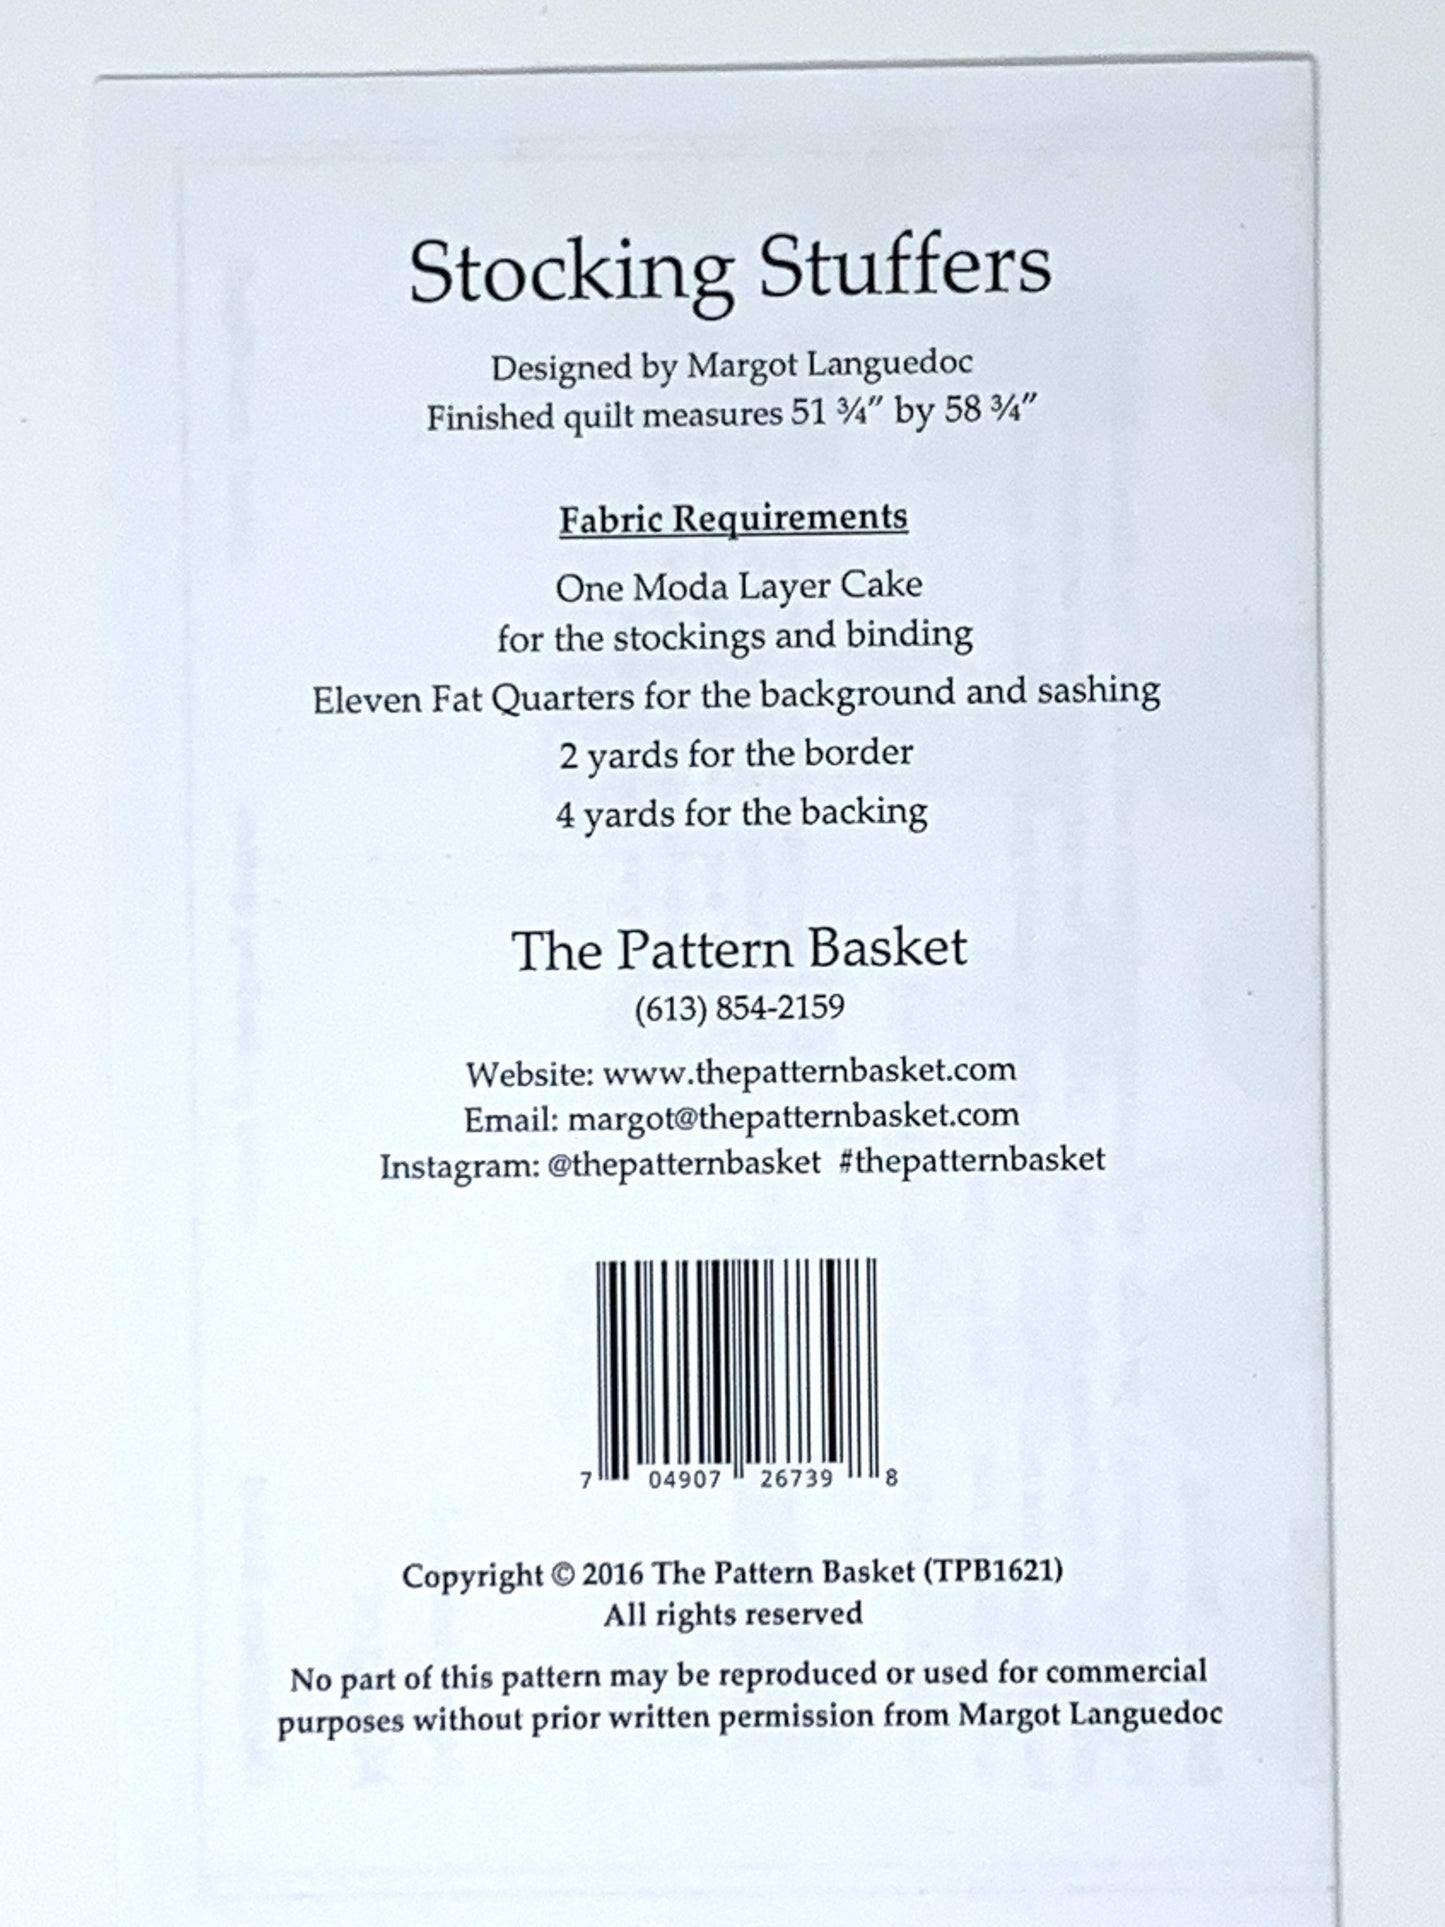 Stocking Stuffers by Margot Languedoc Designs for The Pattern Basket, Quilt Pattern, 10 inch square friendly